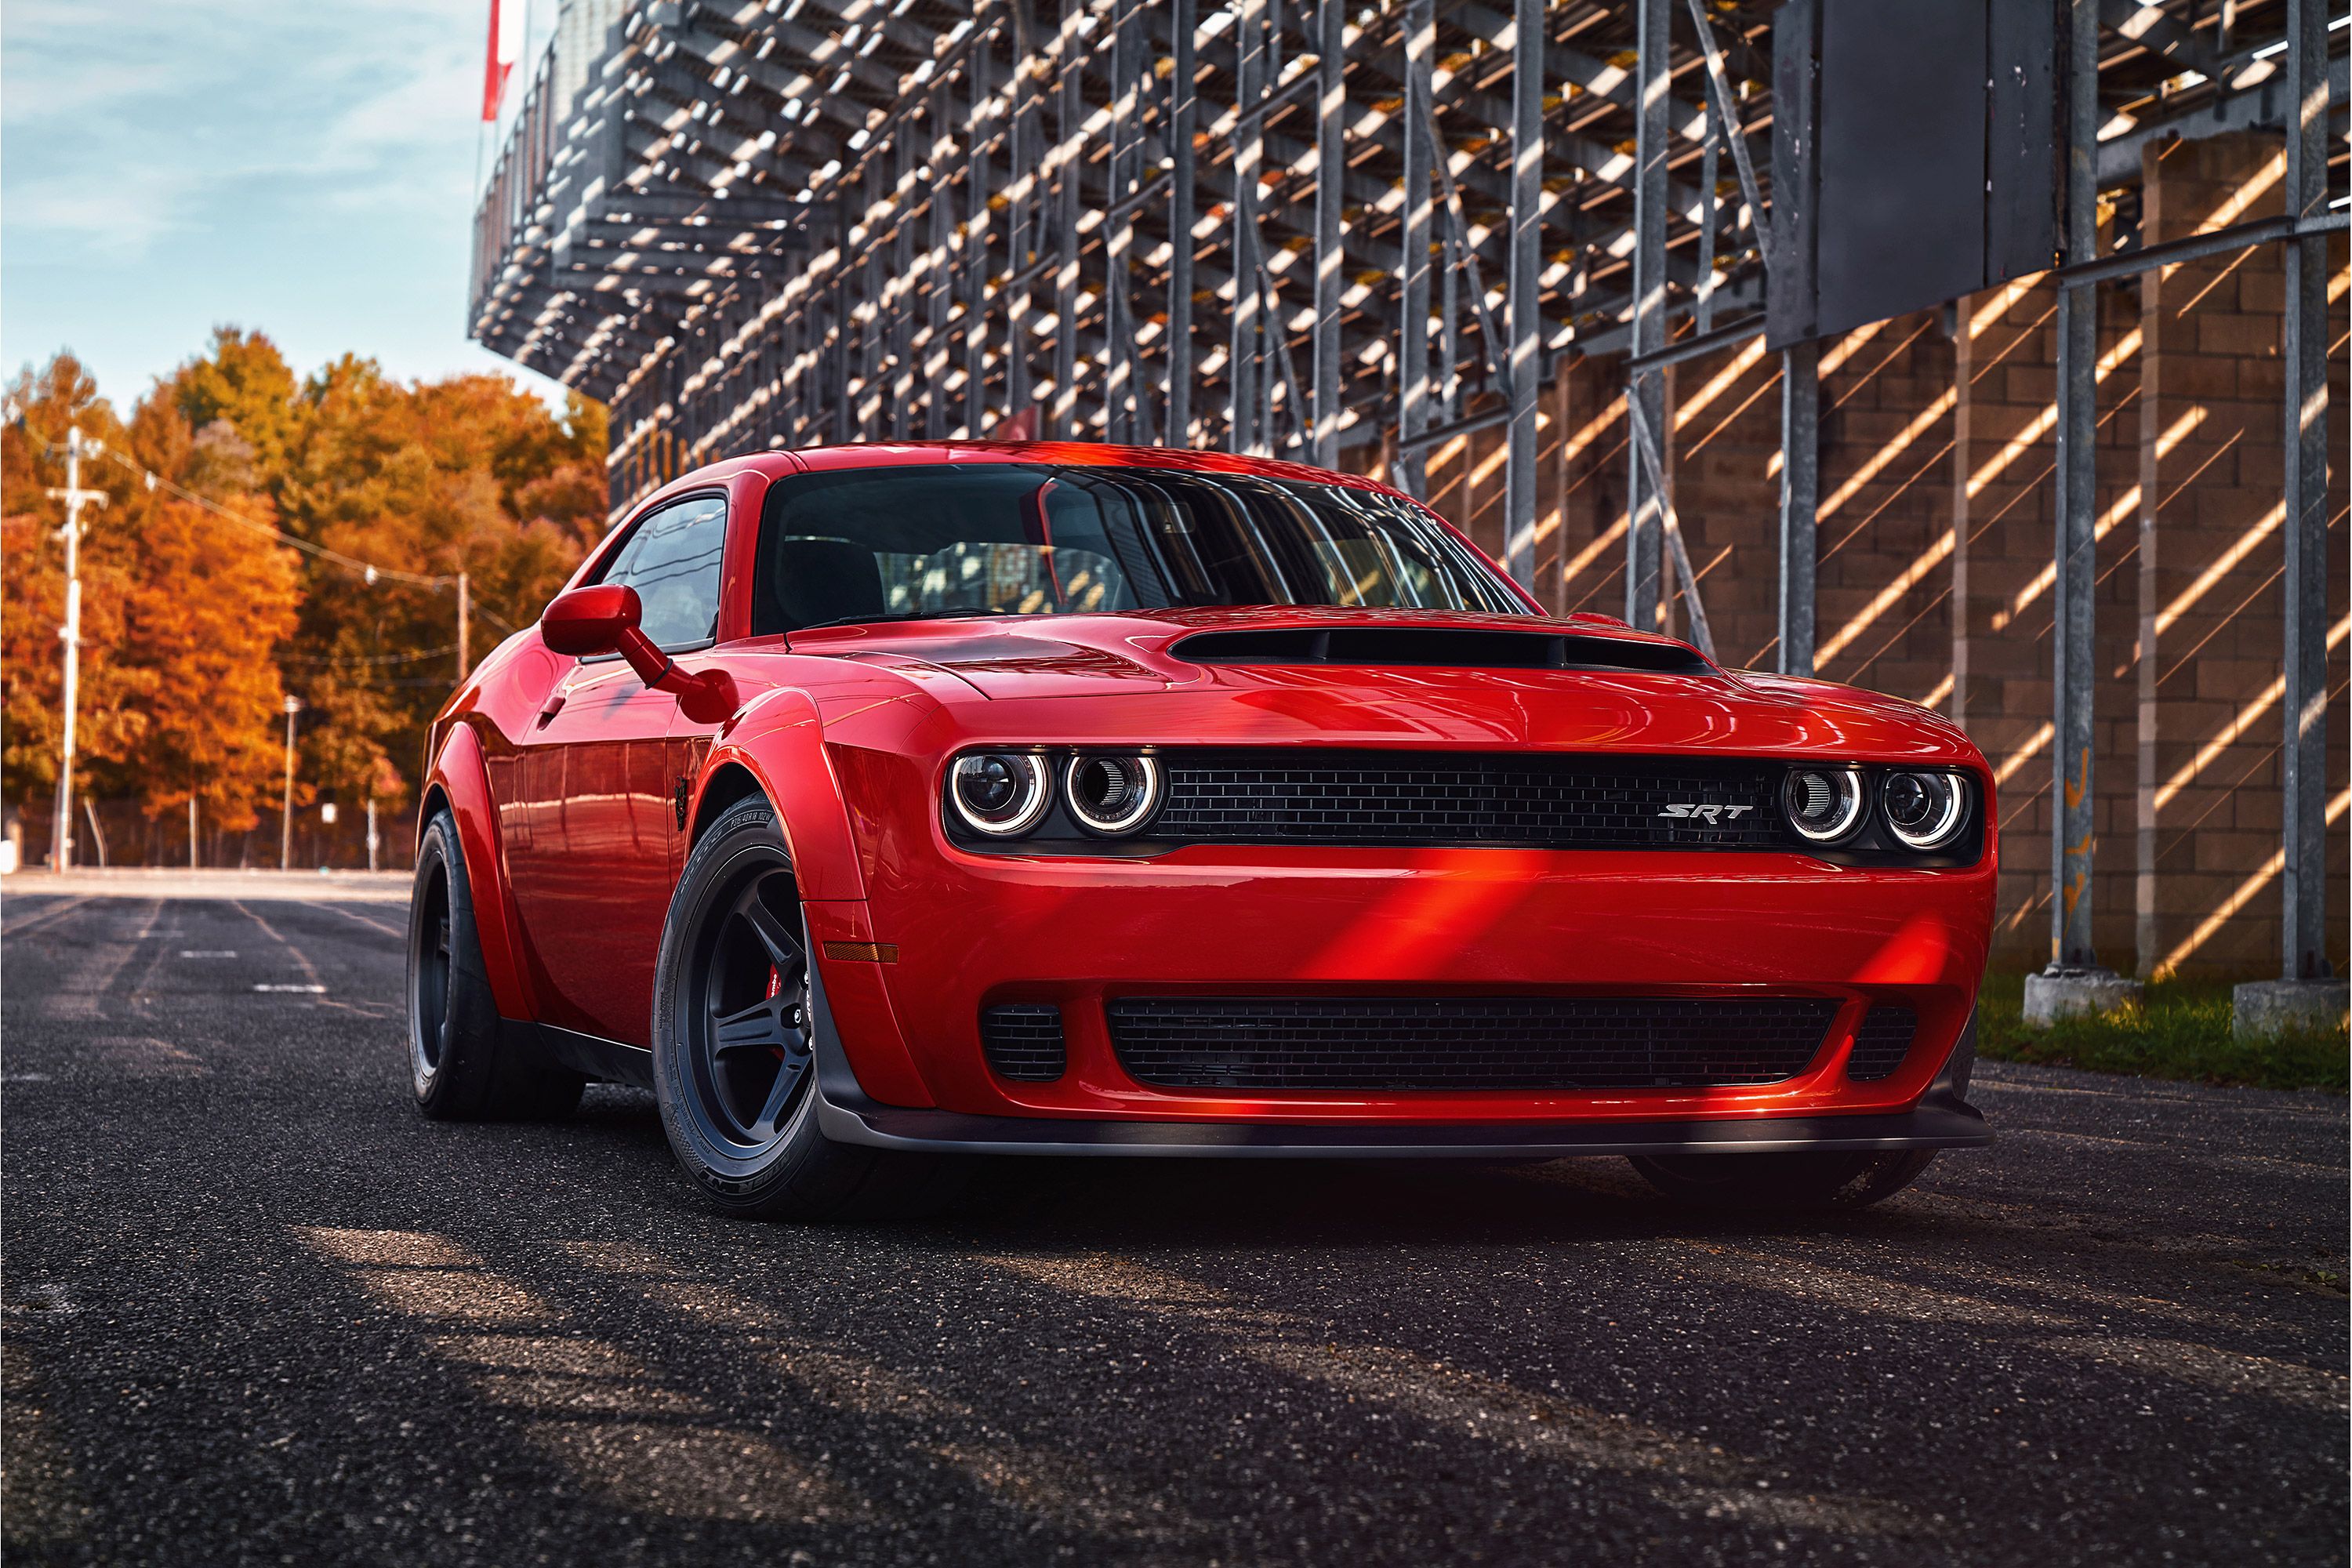 10 Things You Need To Know About The Dodge Demon